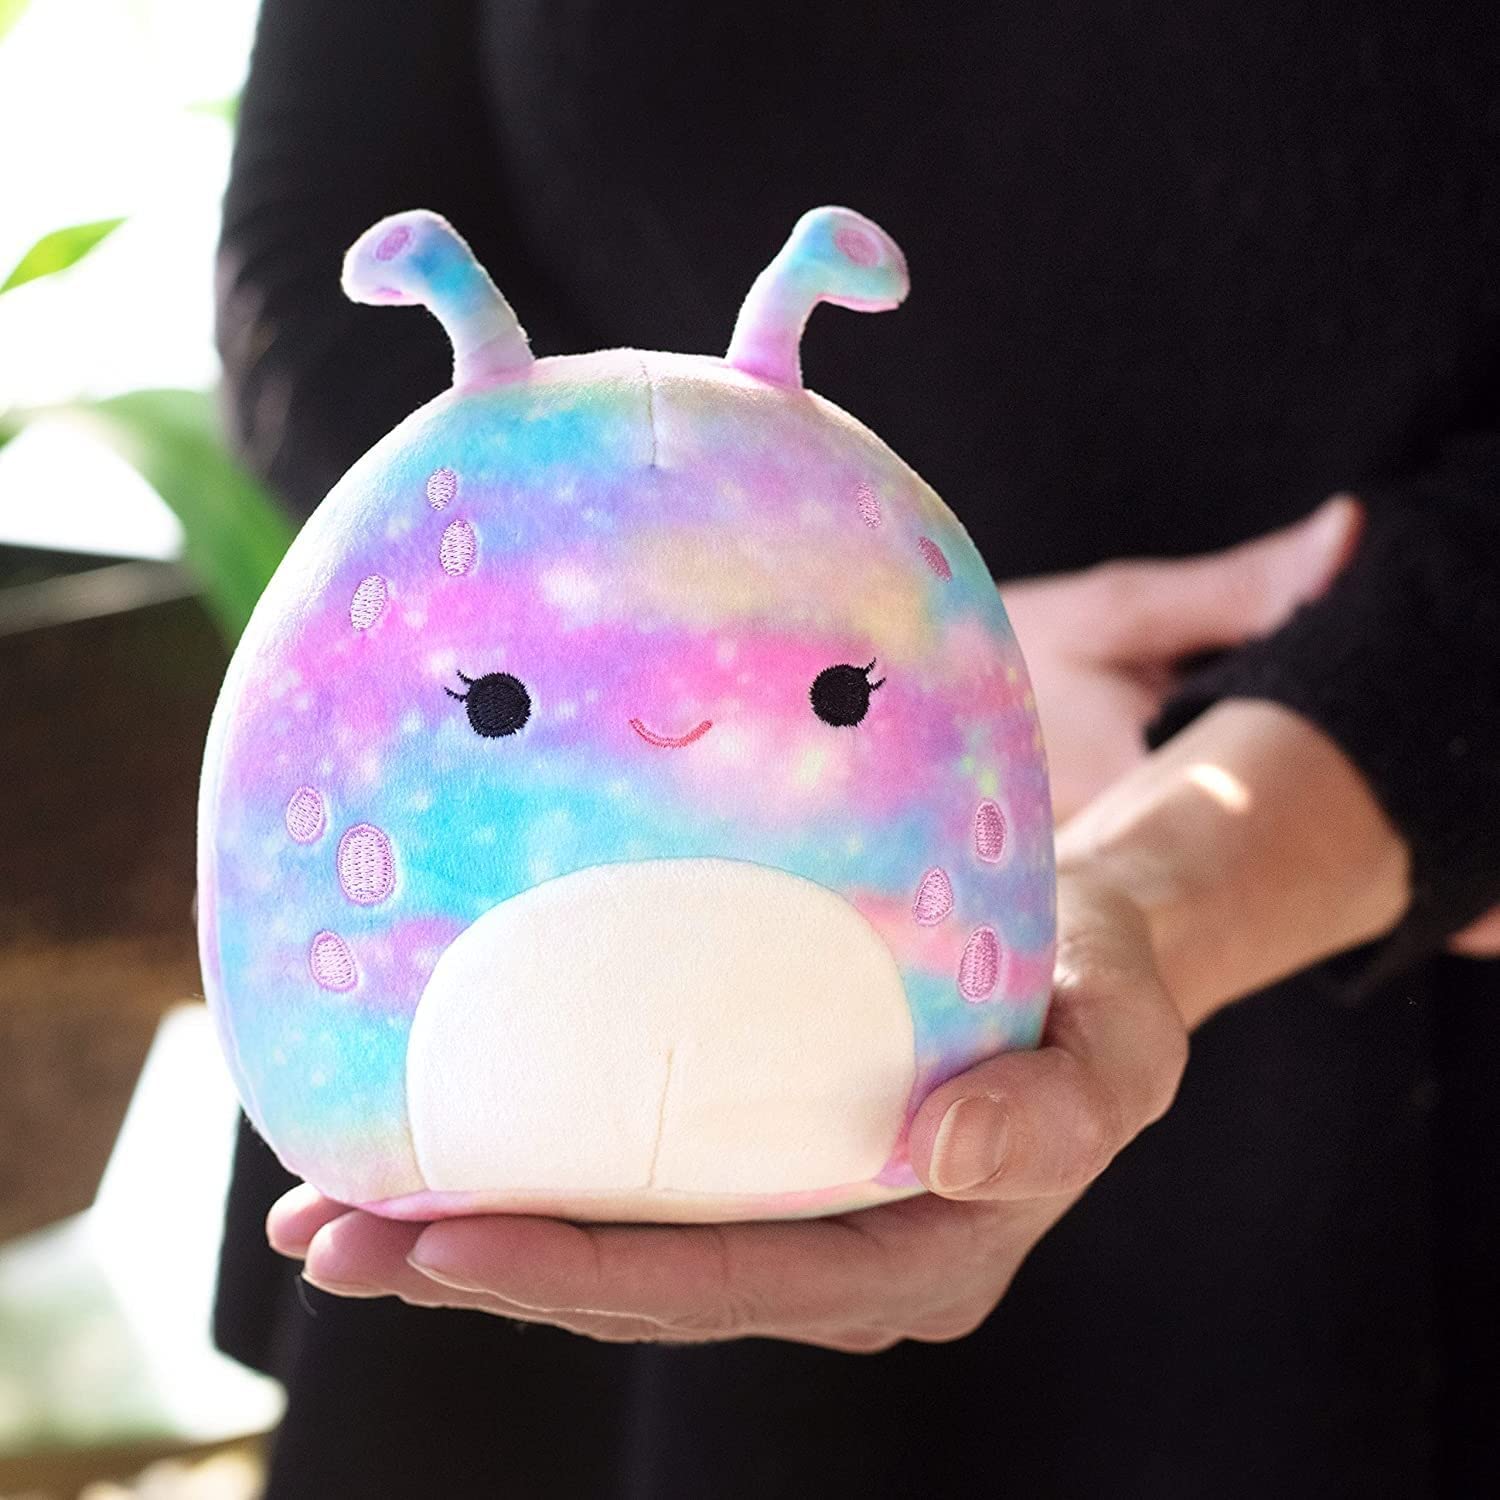 Squishmallow 5" Plush Mystery Box, 5-Pack - Assorted Set of Various Styles - Official Kellytoy - Cute and Soft Squishy Stuffed Animal Toy - image 2 of 5